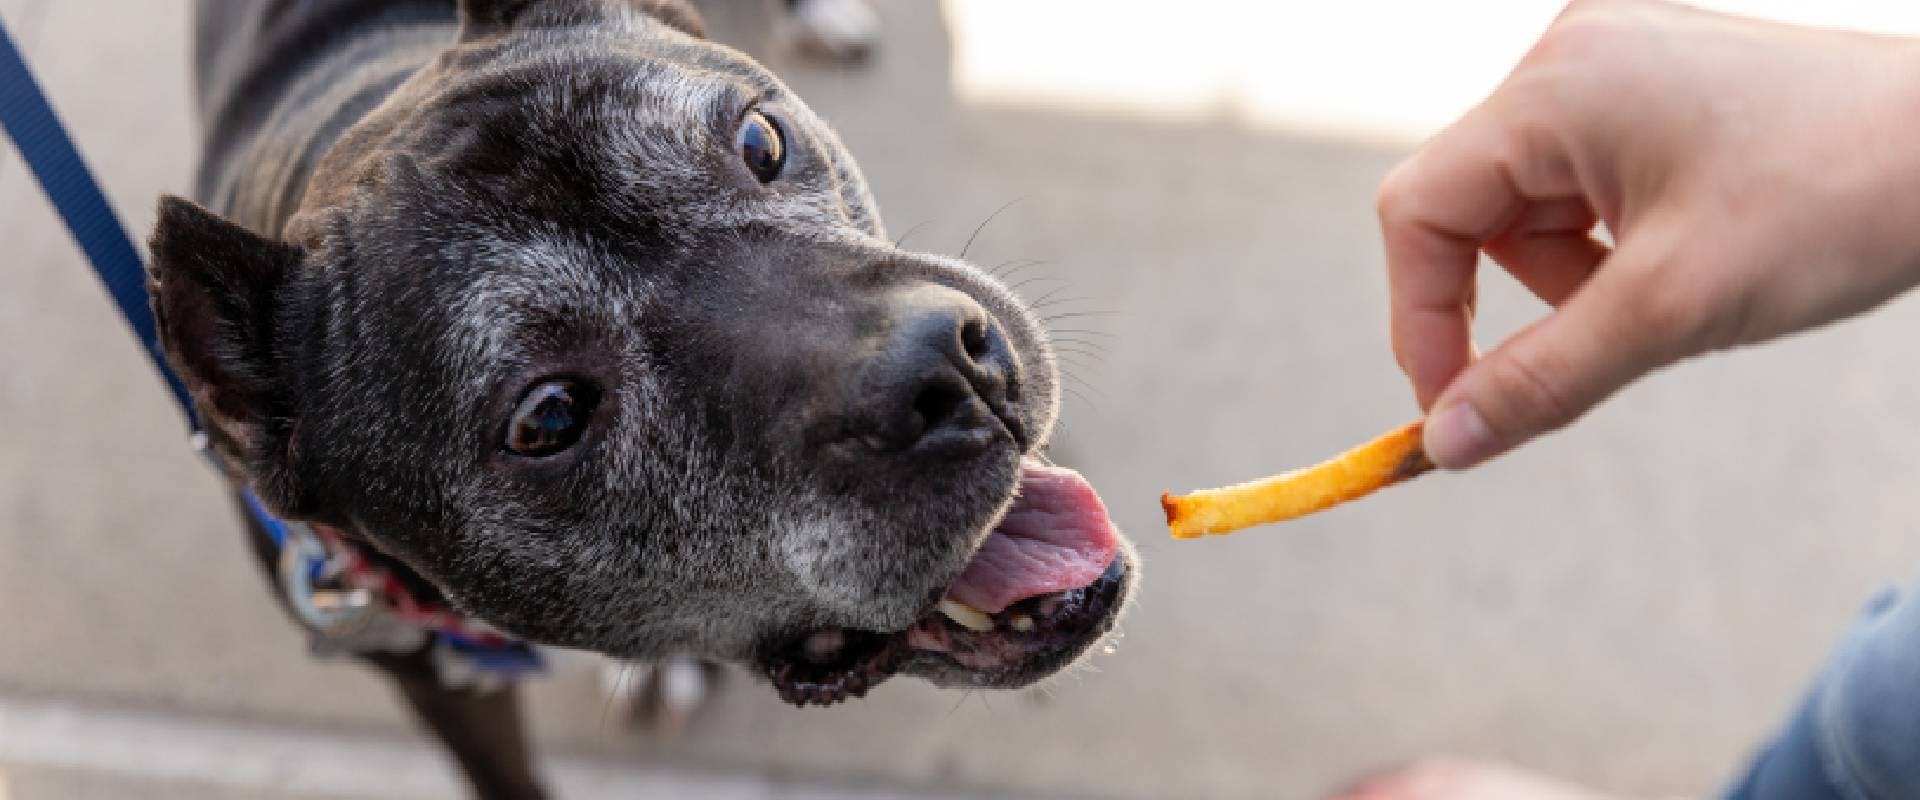 Dog about to eat a french fry